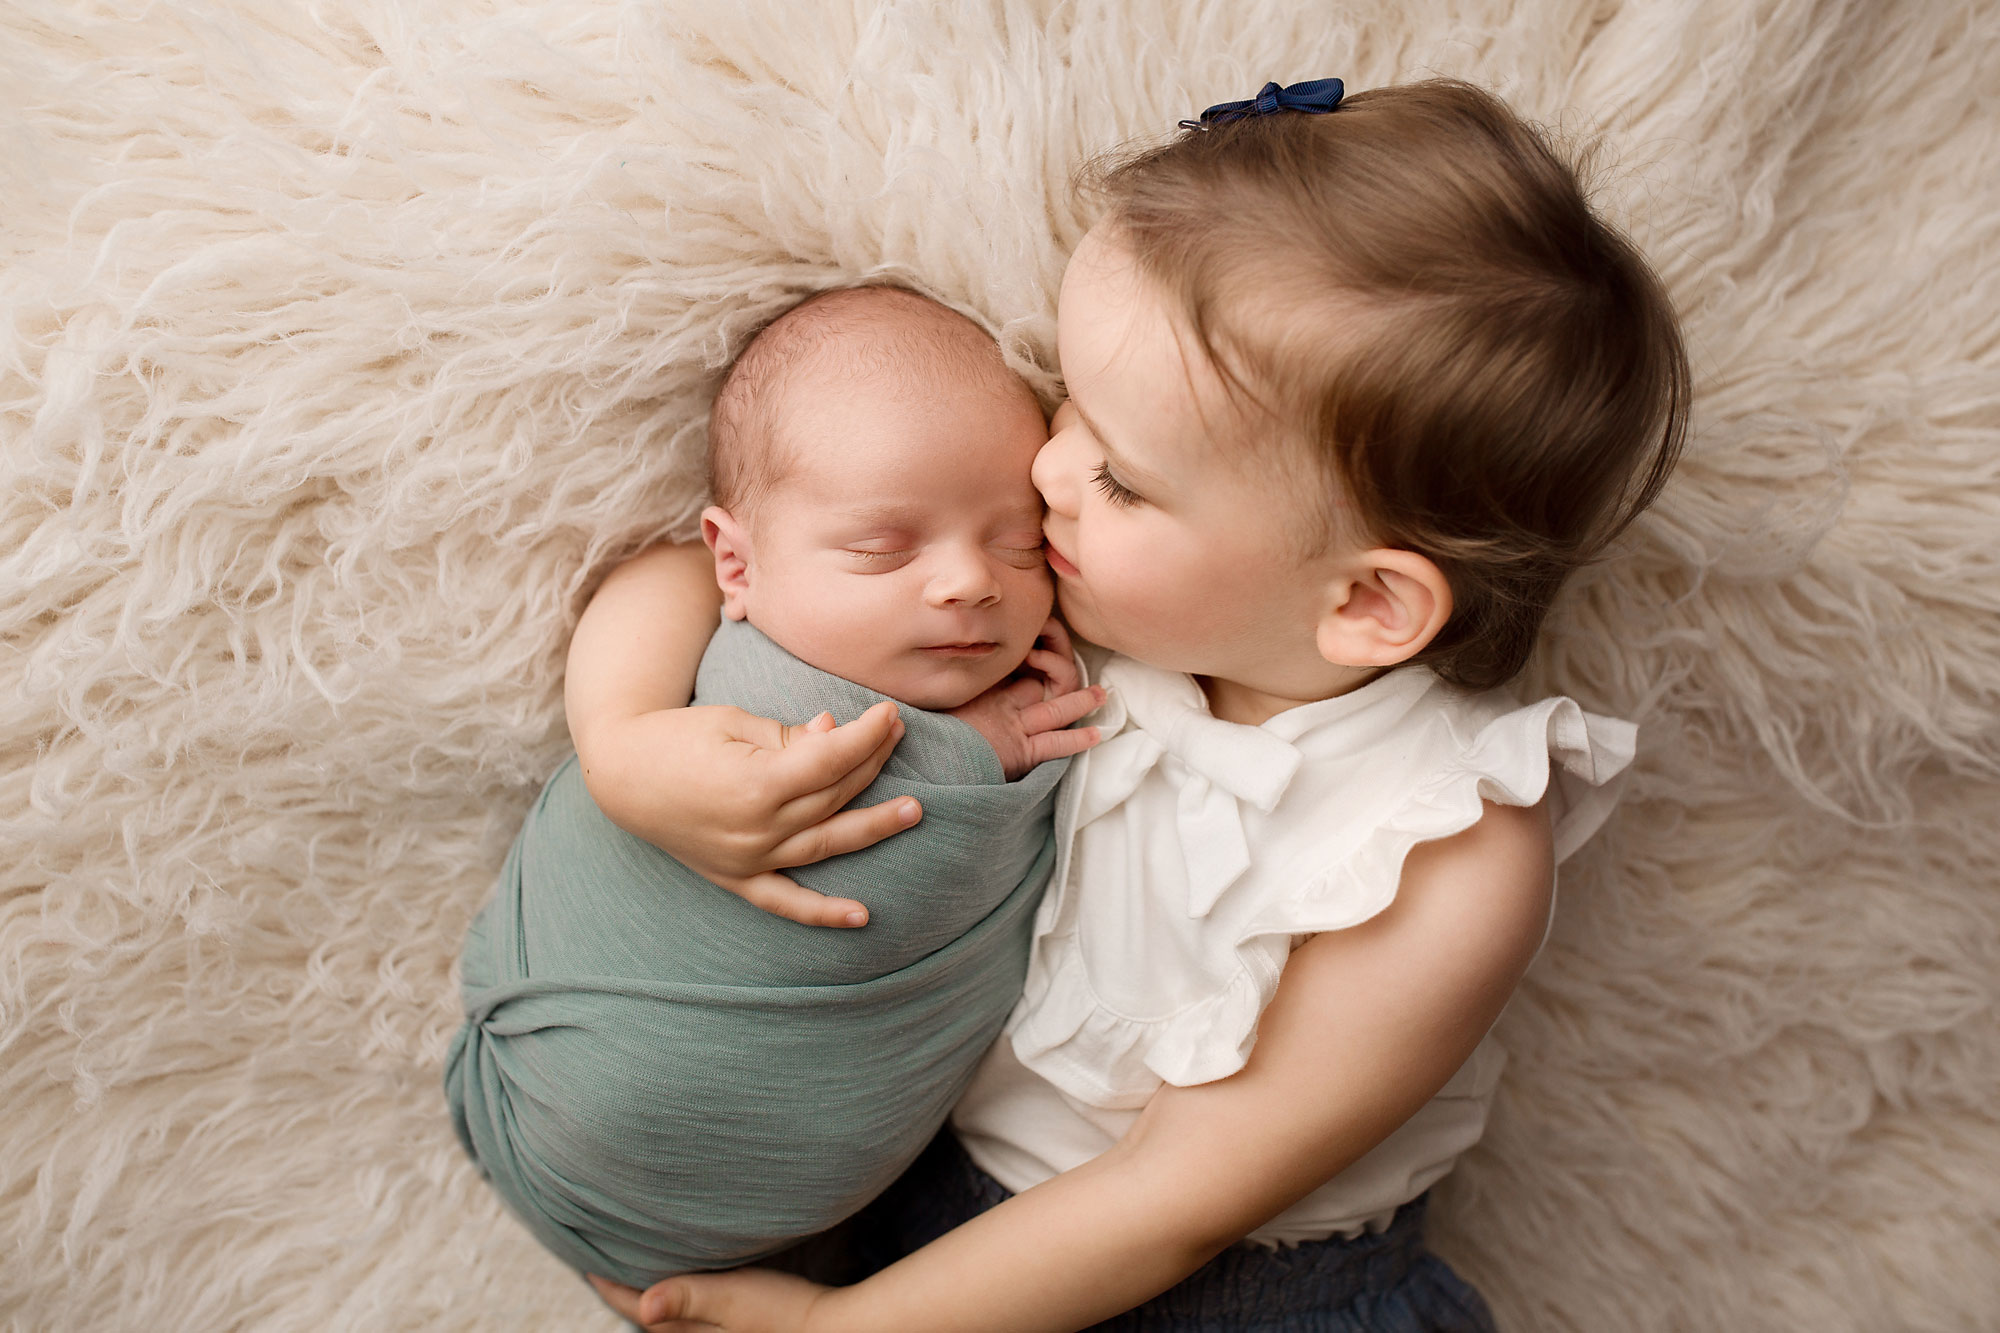 professional newborn and sibling photography, little girl snuggling swaddled baby against a soft fur background